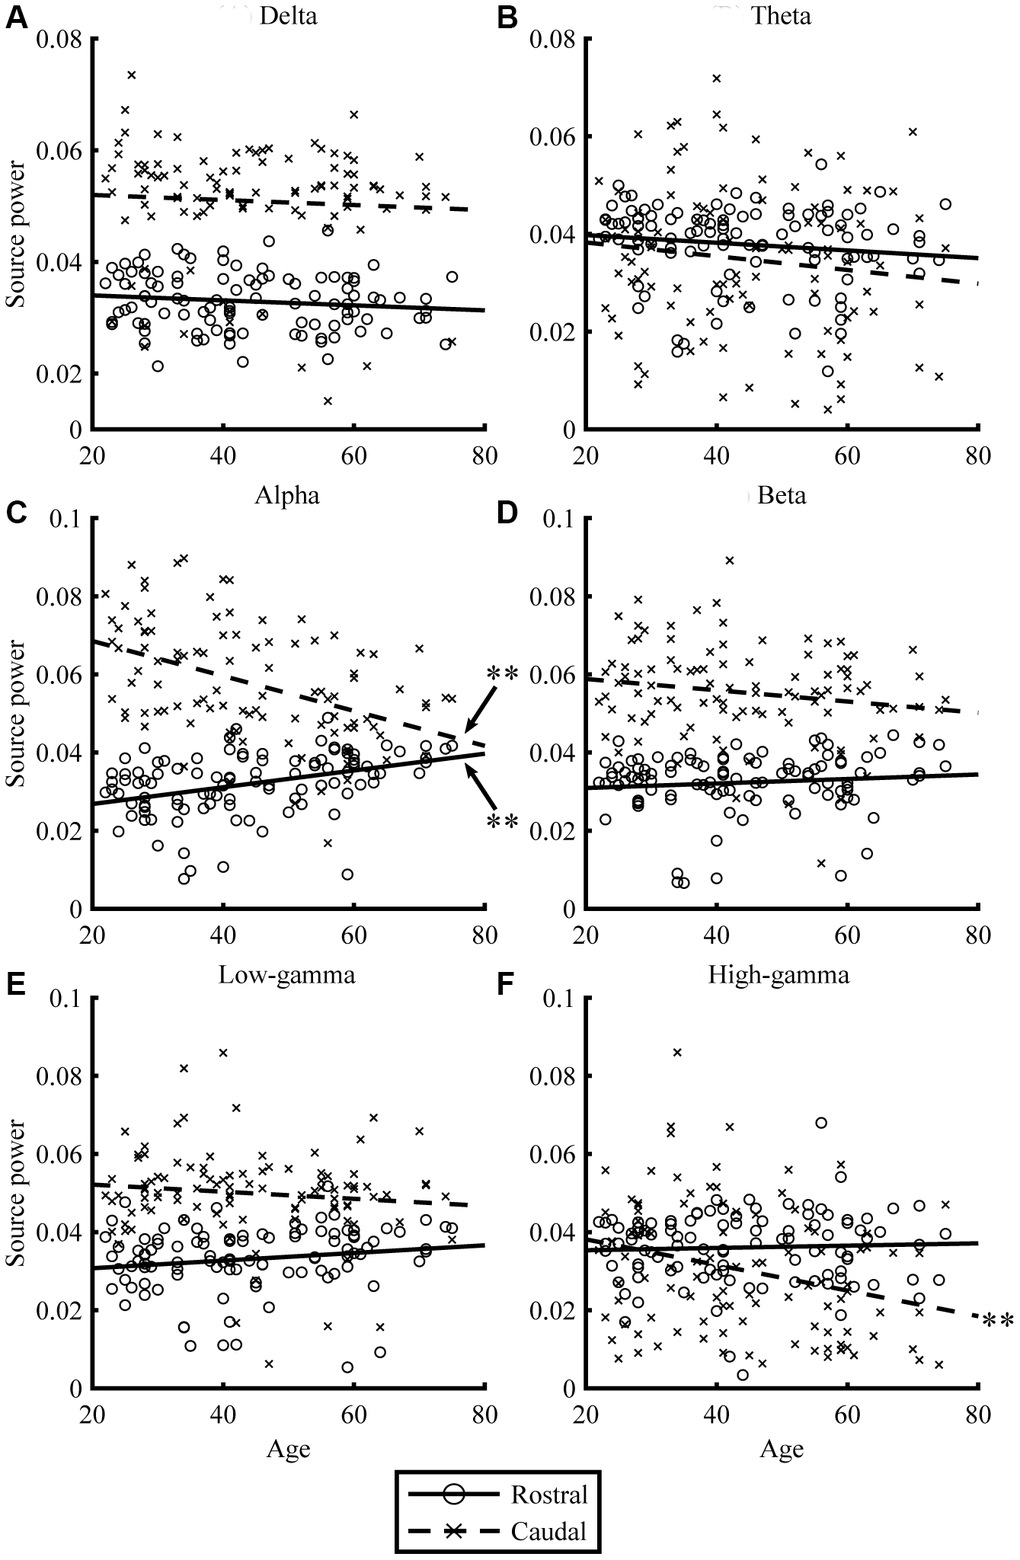 Relationships between age and regional source power for EO condition. The scatterplots visualize the relationships between age (x-axis) and regional source power (y-axis) in each frequency band (A: Delta, B: Theta, C: Alpha, D: Beta, E: Low-gamma, and F: High-gamma band) for EO condition. The lines represent linear-fitted (in a least-squares sense) data. Double asterisks (**) indicate significant correlations (please see Table 2 for statistical values).